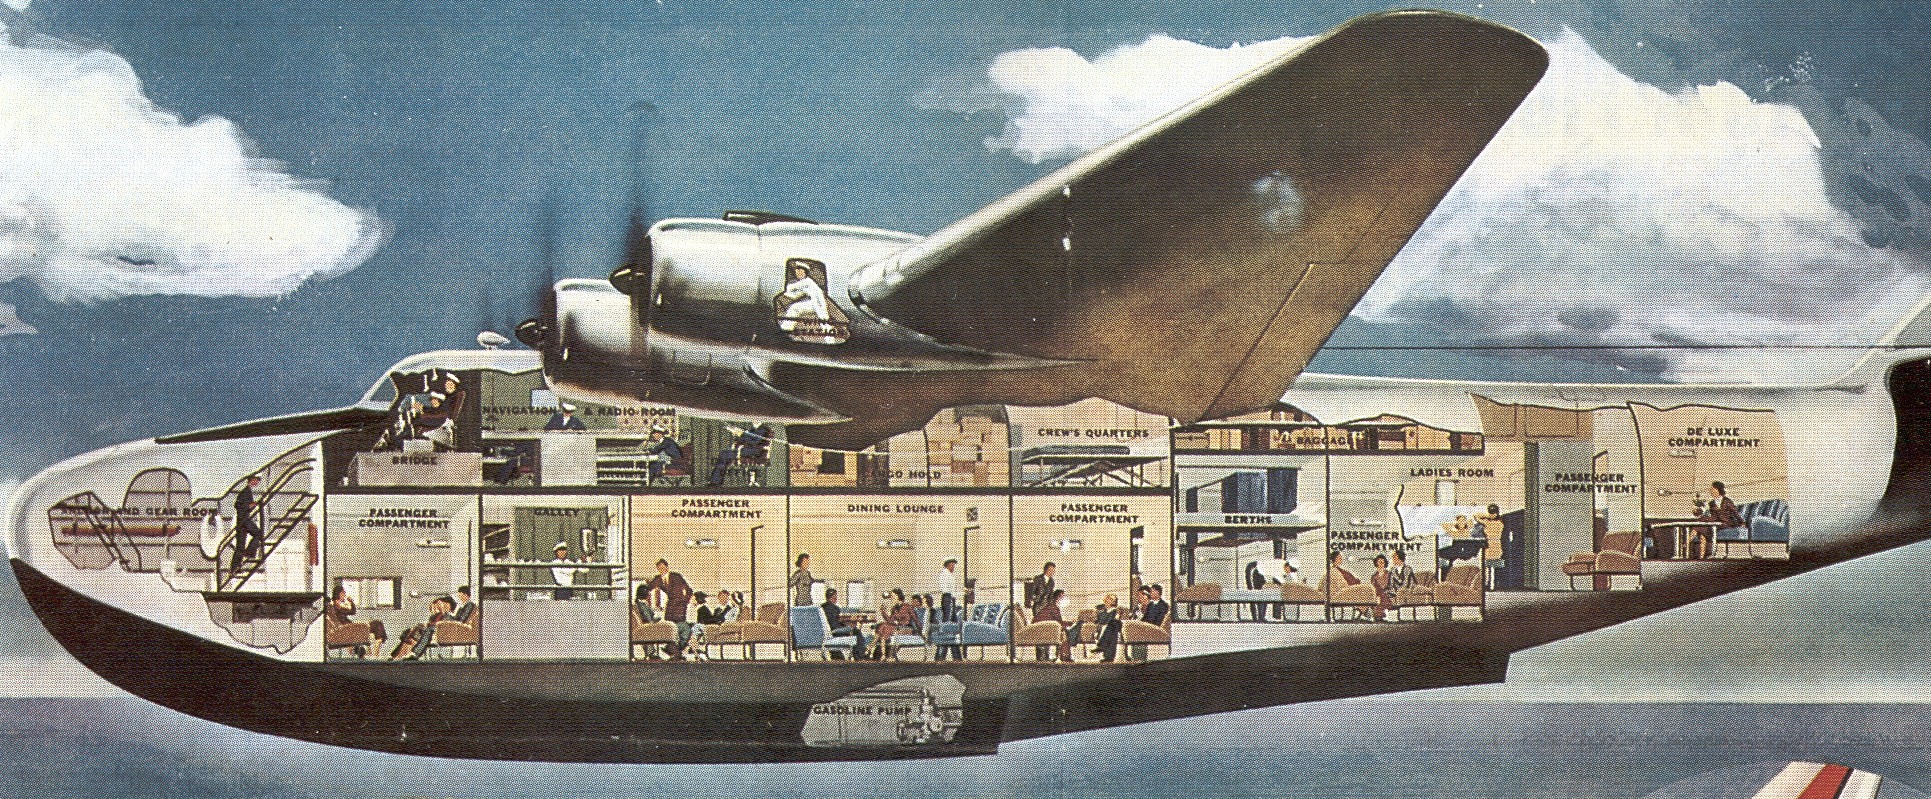 Boeing 314 Clipper Pics, Vehicles Collection